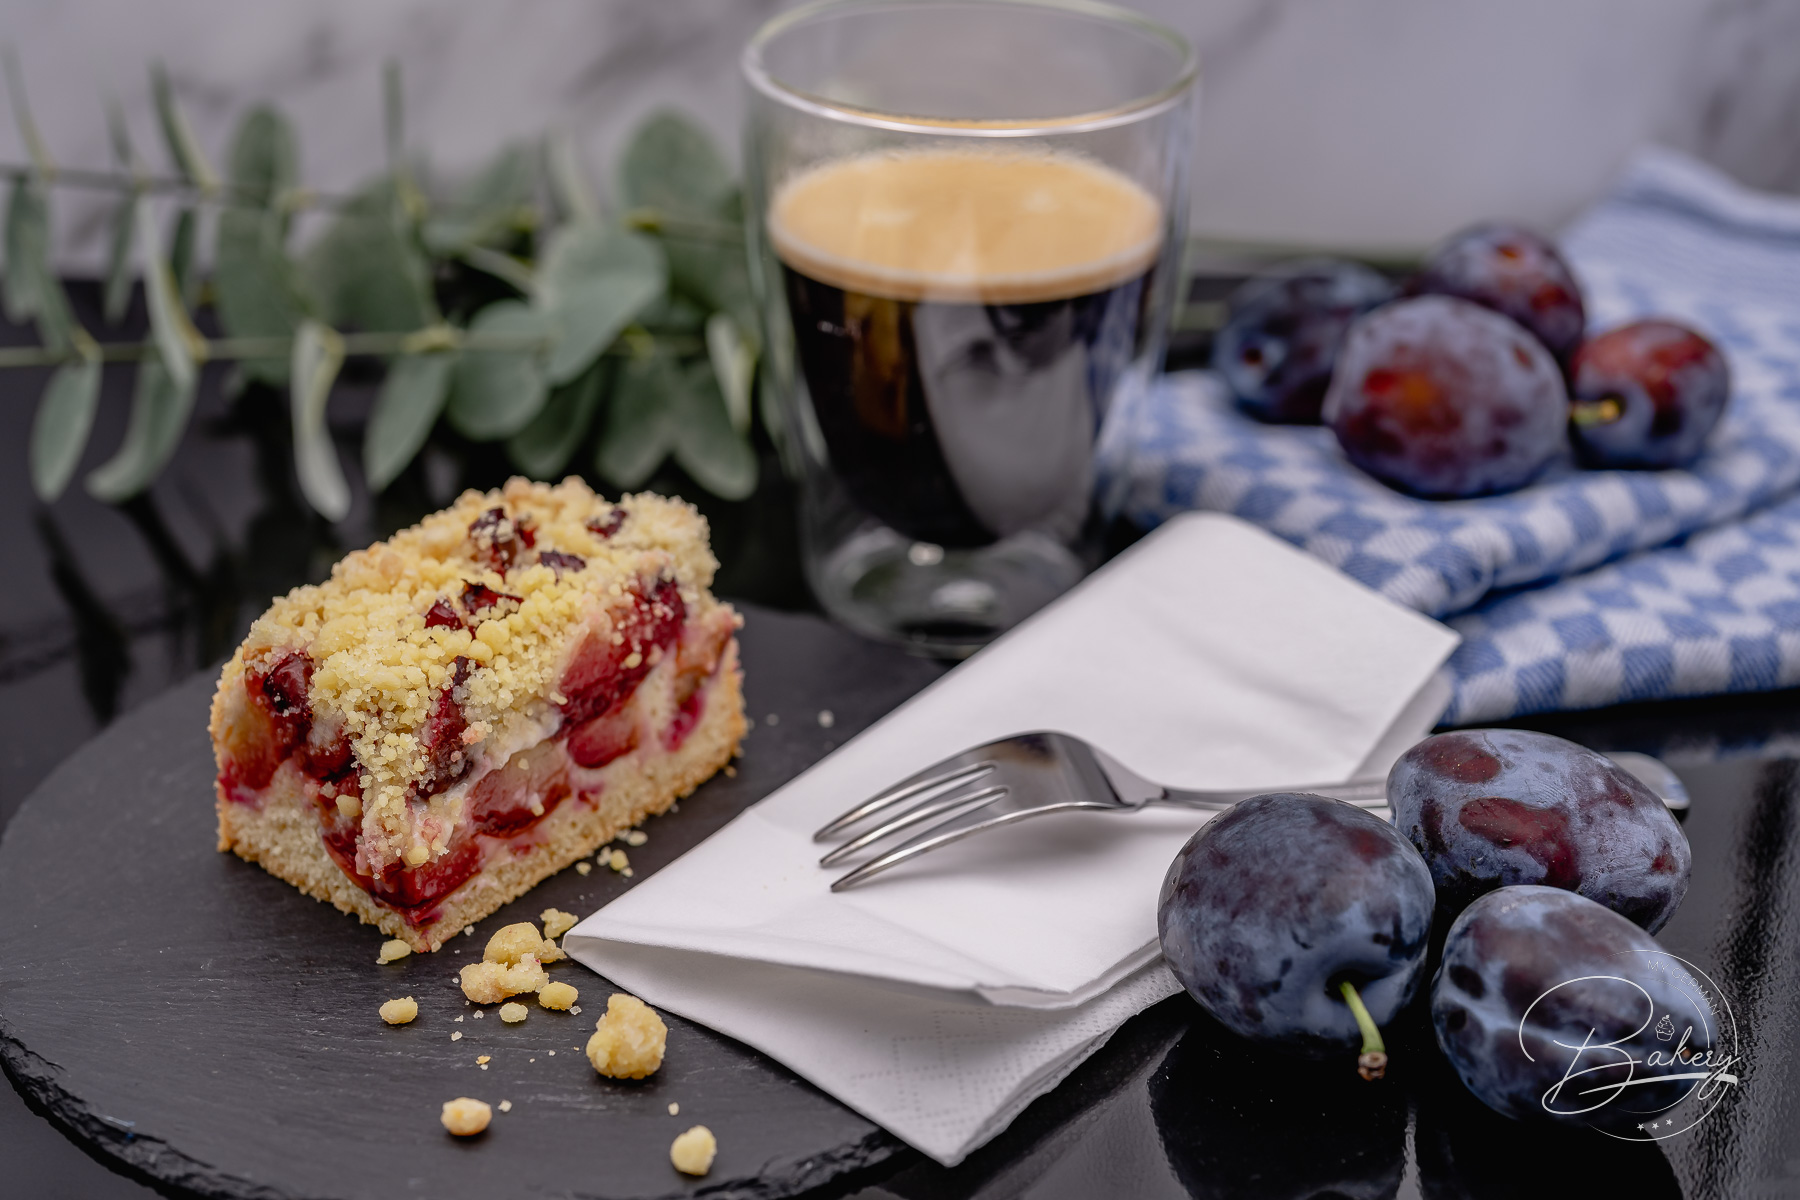 Plum cake recipe with crumble - Quick sheet cake - Plum crumble cake recipe - Plum cake recipe with crumble for a sheet of plum cake. Quick and easy sheet cake with plums. Juicy, soft, crunchy